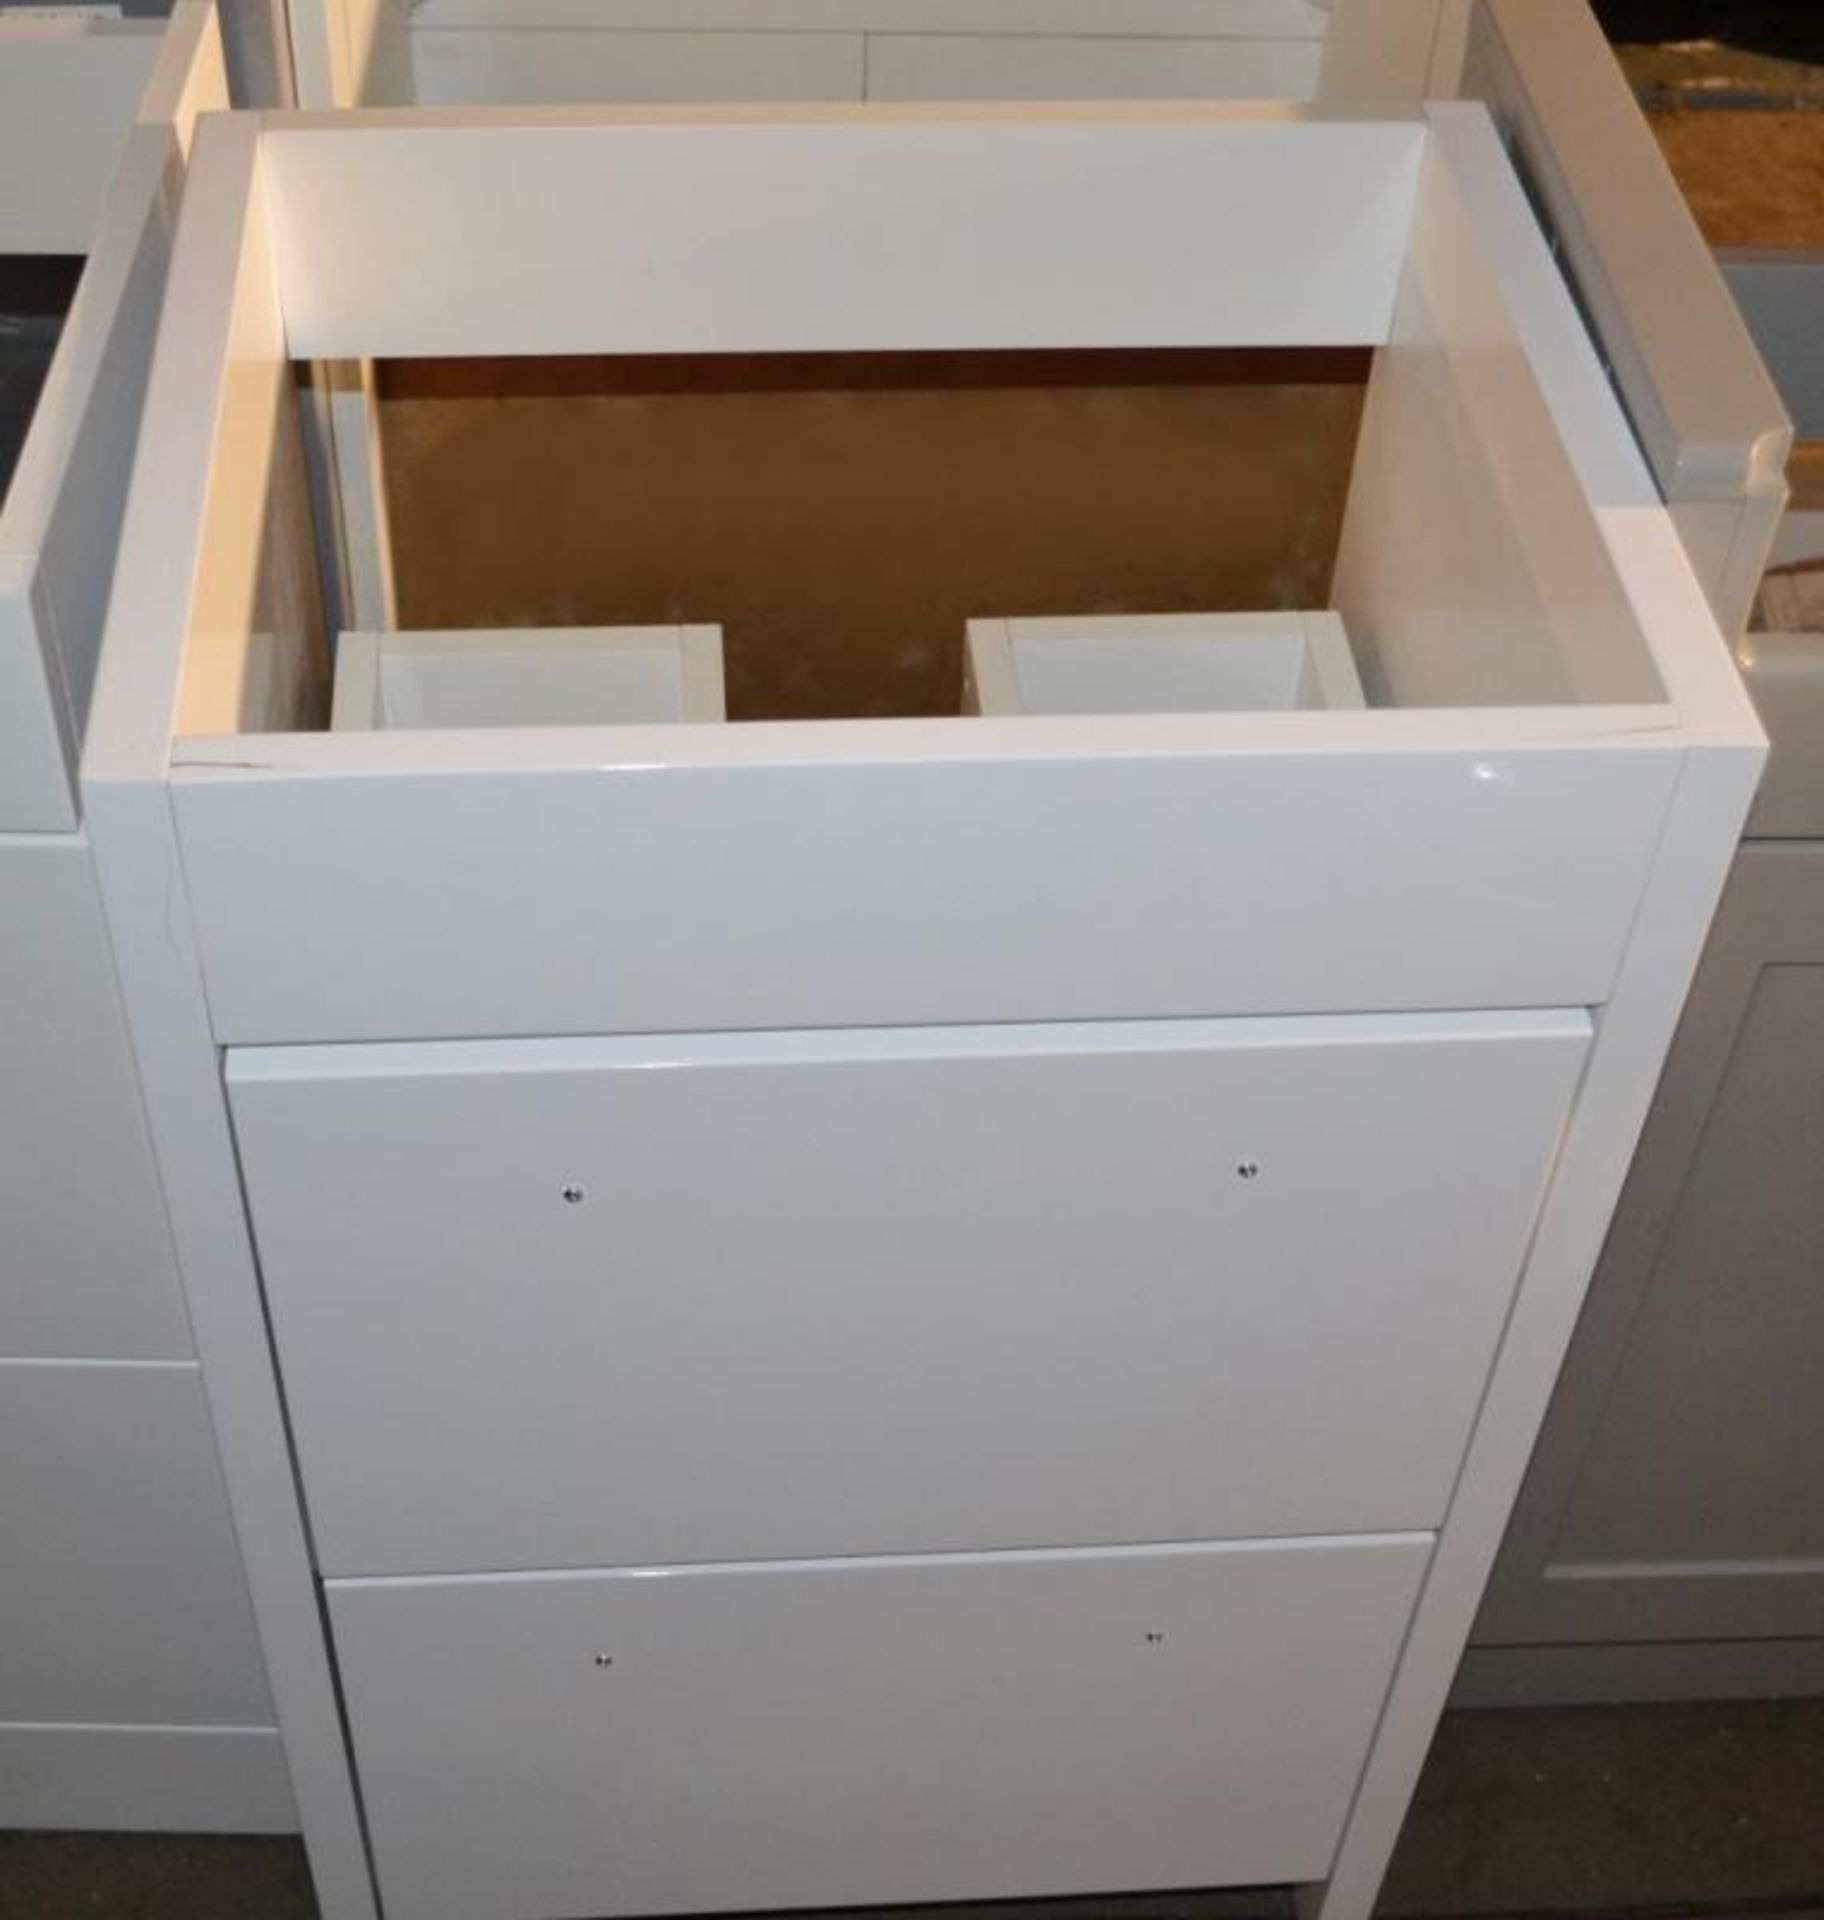 1 x Freestanding 2-Drawer Vanity Basin Unit In A Gloss White Finish - New / Unused Stock - Dimension - Image 2 of 6